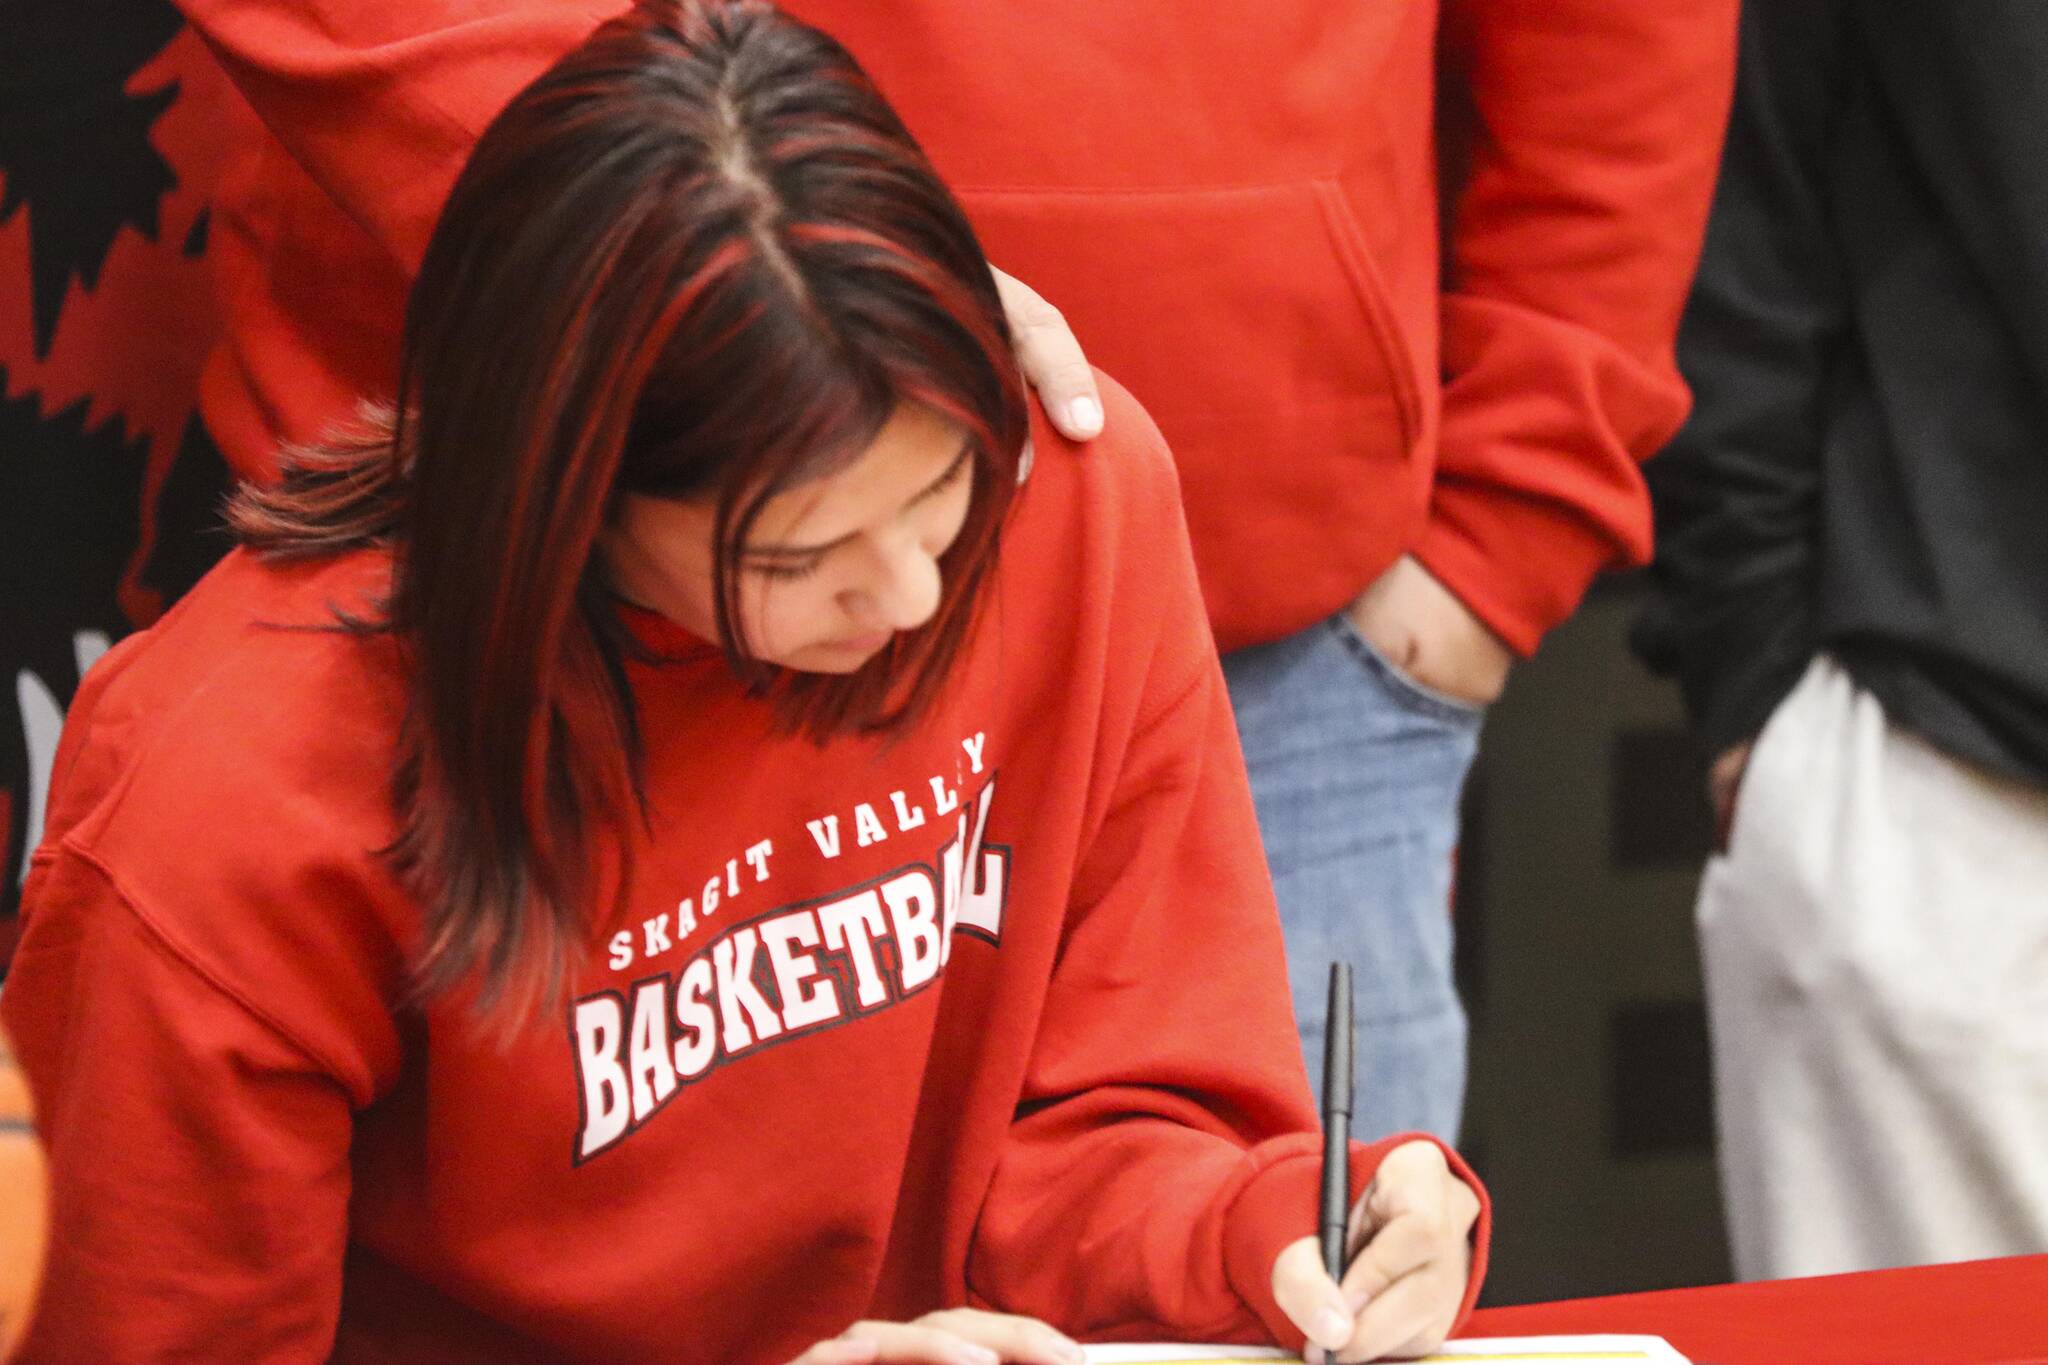 JDHS basketball player Trinity Jackson signs her letter of intent to play basketball for Skagit Valley College on May 4, 2022. (Michael S. Lockett / Juneau Empire)